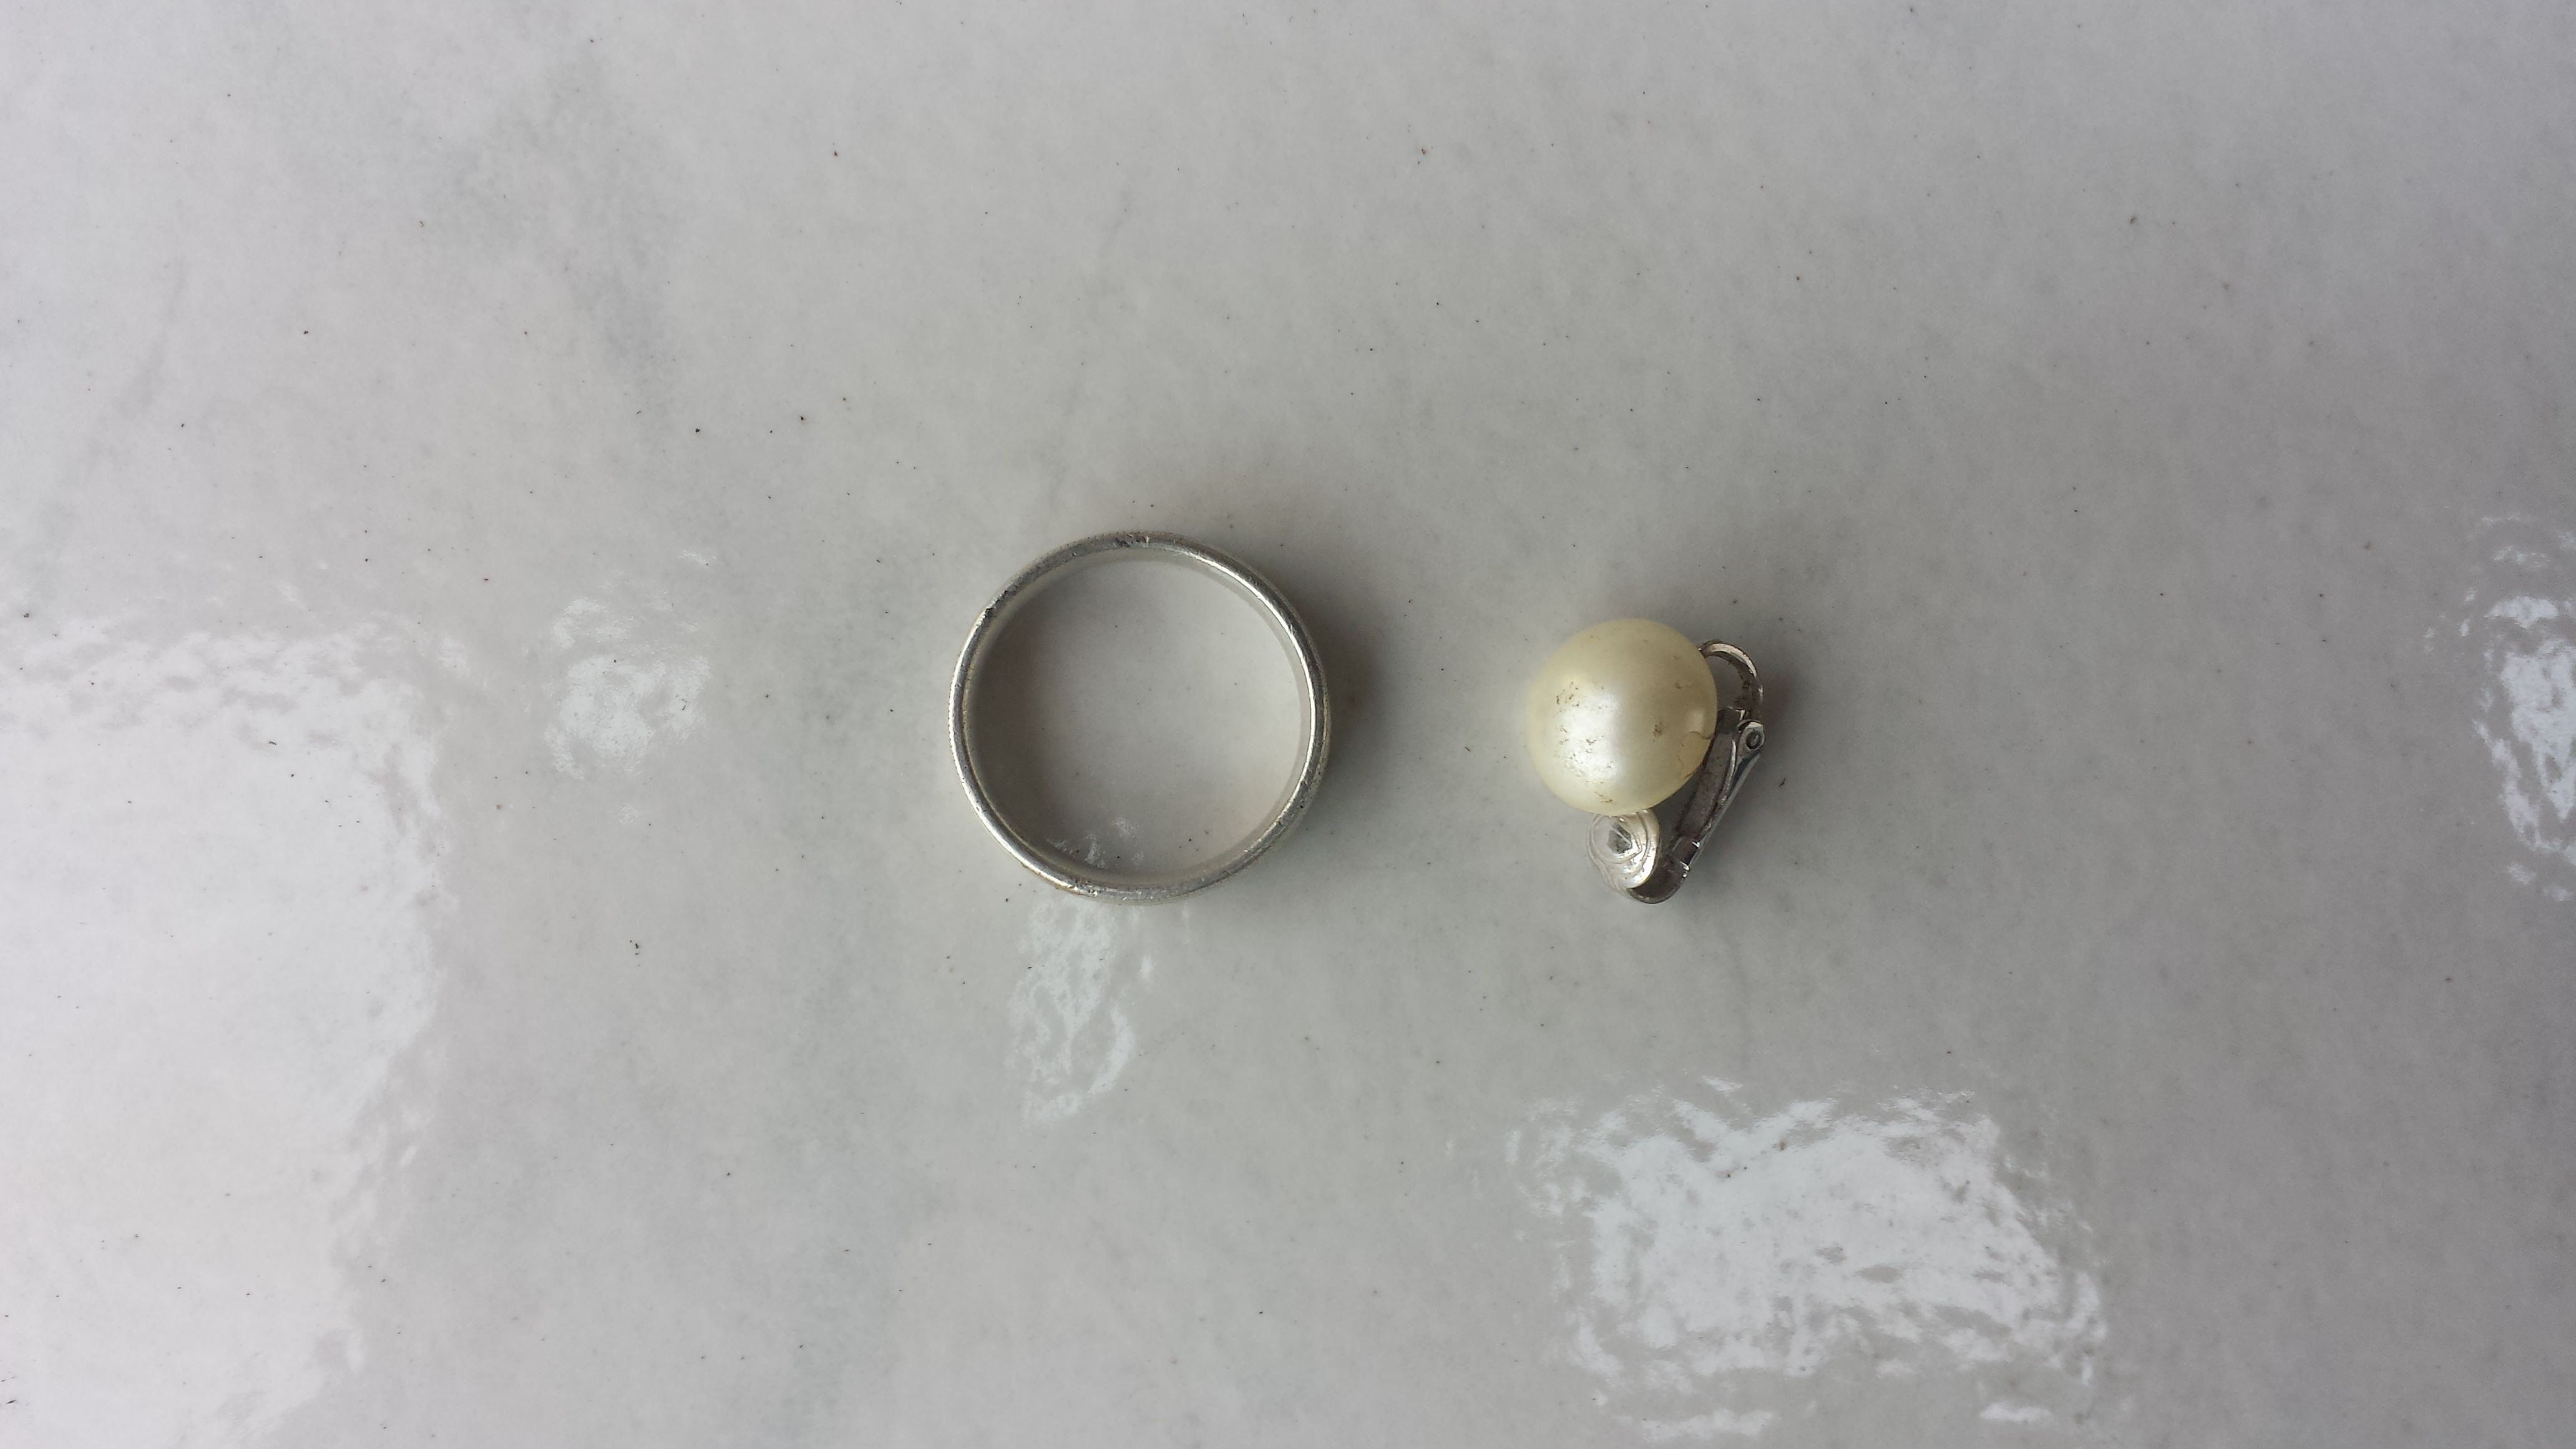 20160221 170320  Notables  Silver ring and junk earring,